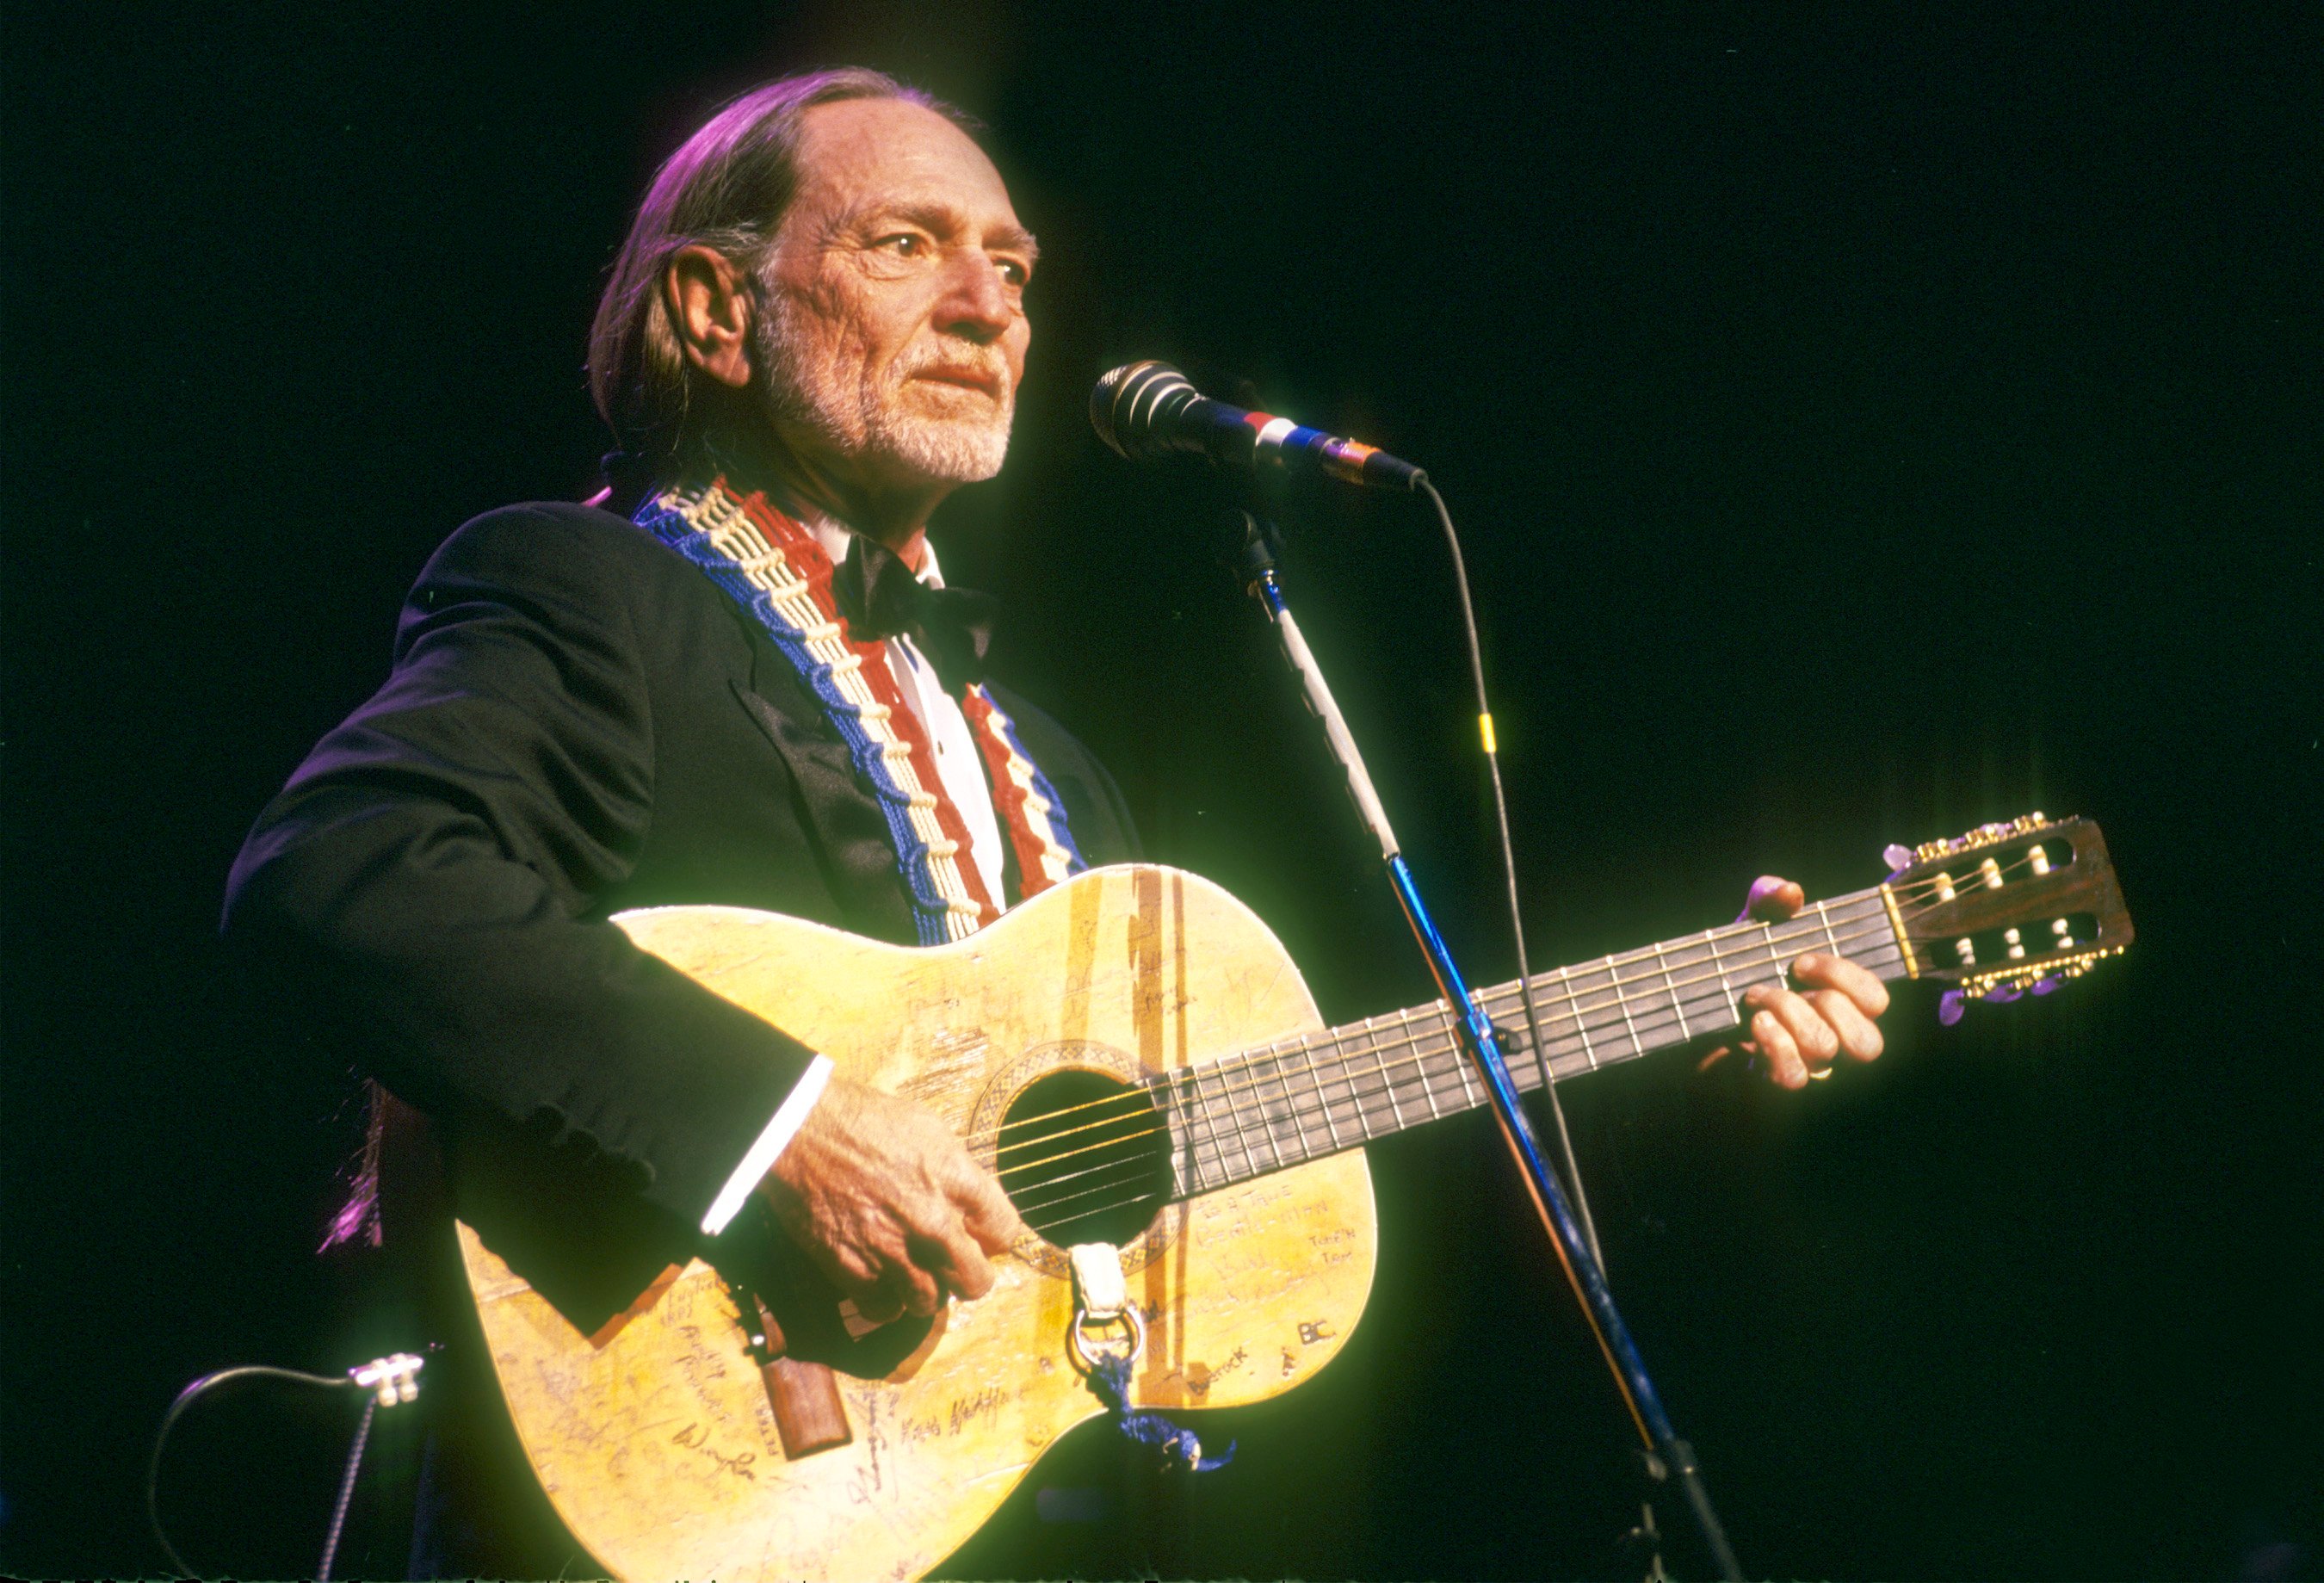 American country music artist Willie Nelson